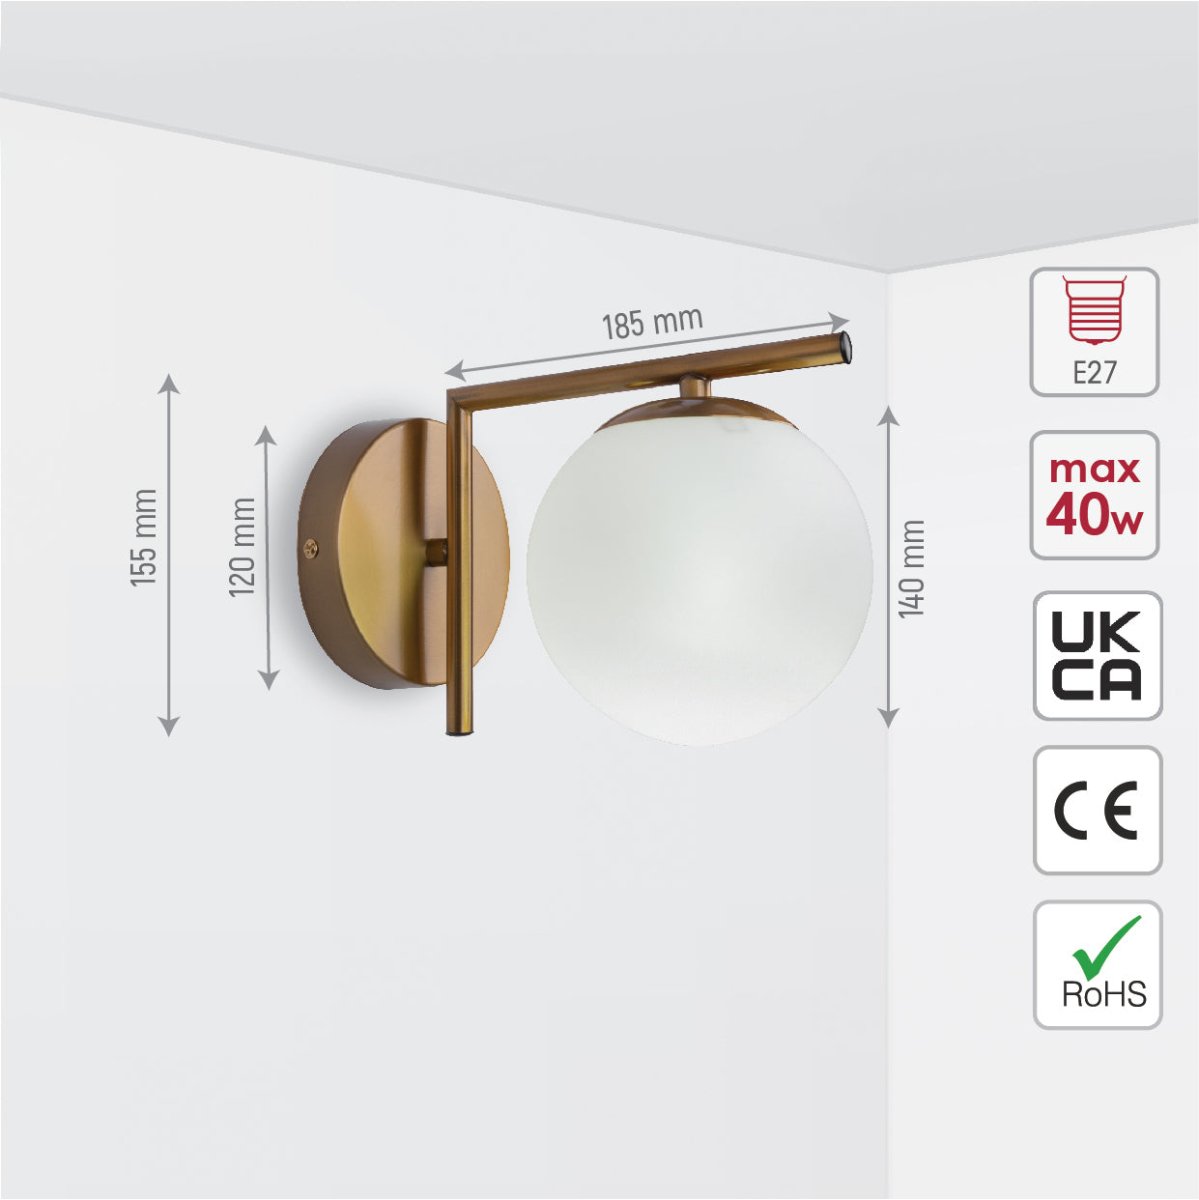 Size and specs of Opal Globe Glass Bronze L Shape Metal Wall Light with E27 Fitting | TEKLED 151-19498